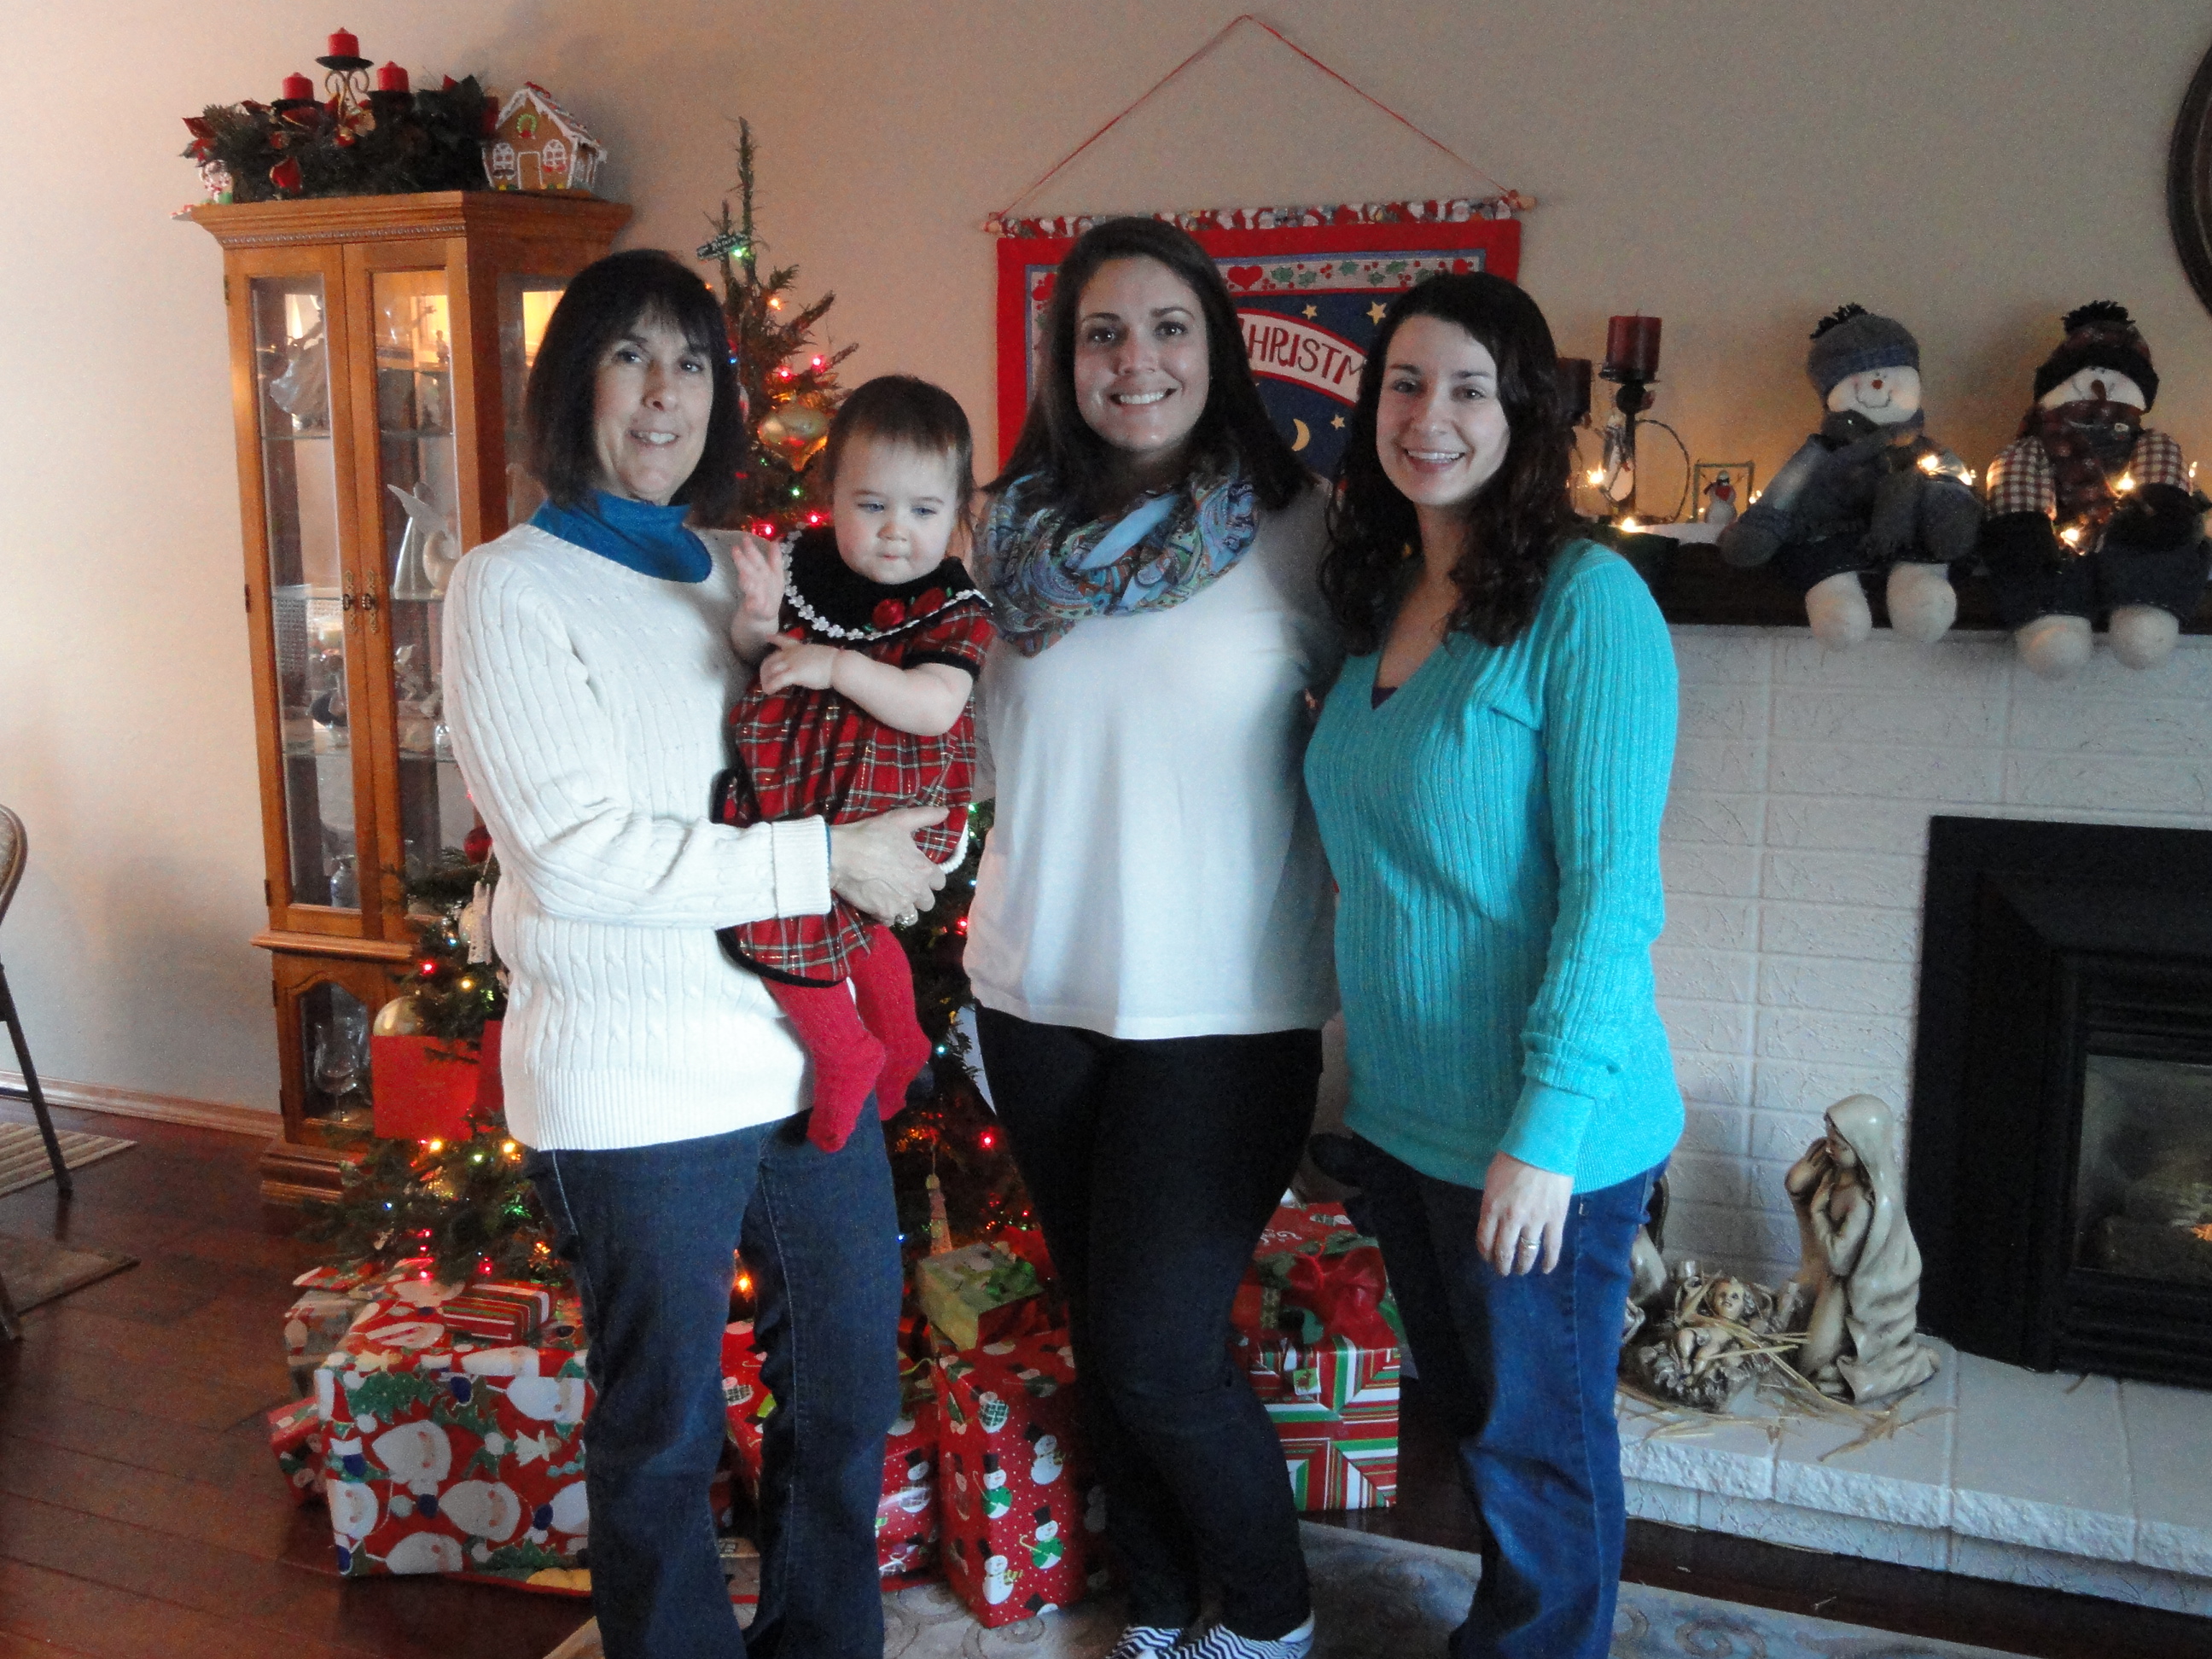 Sidney got to enjoy the holidays with my family. In this photo she is with my mom, my niece, and my sister.